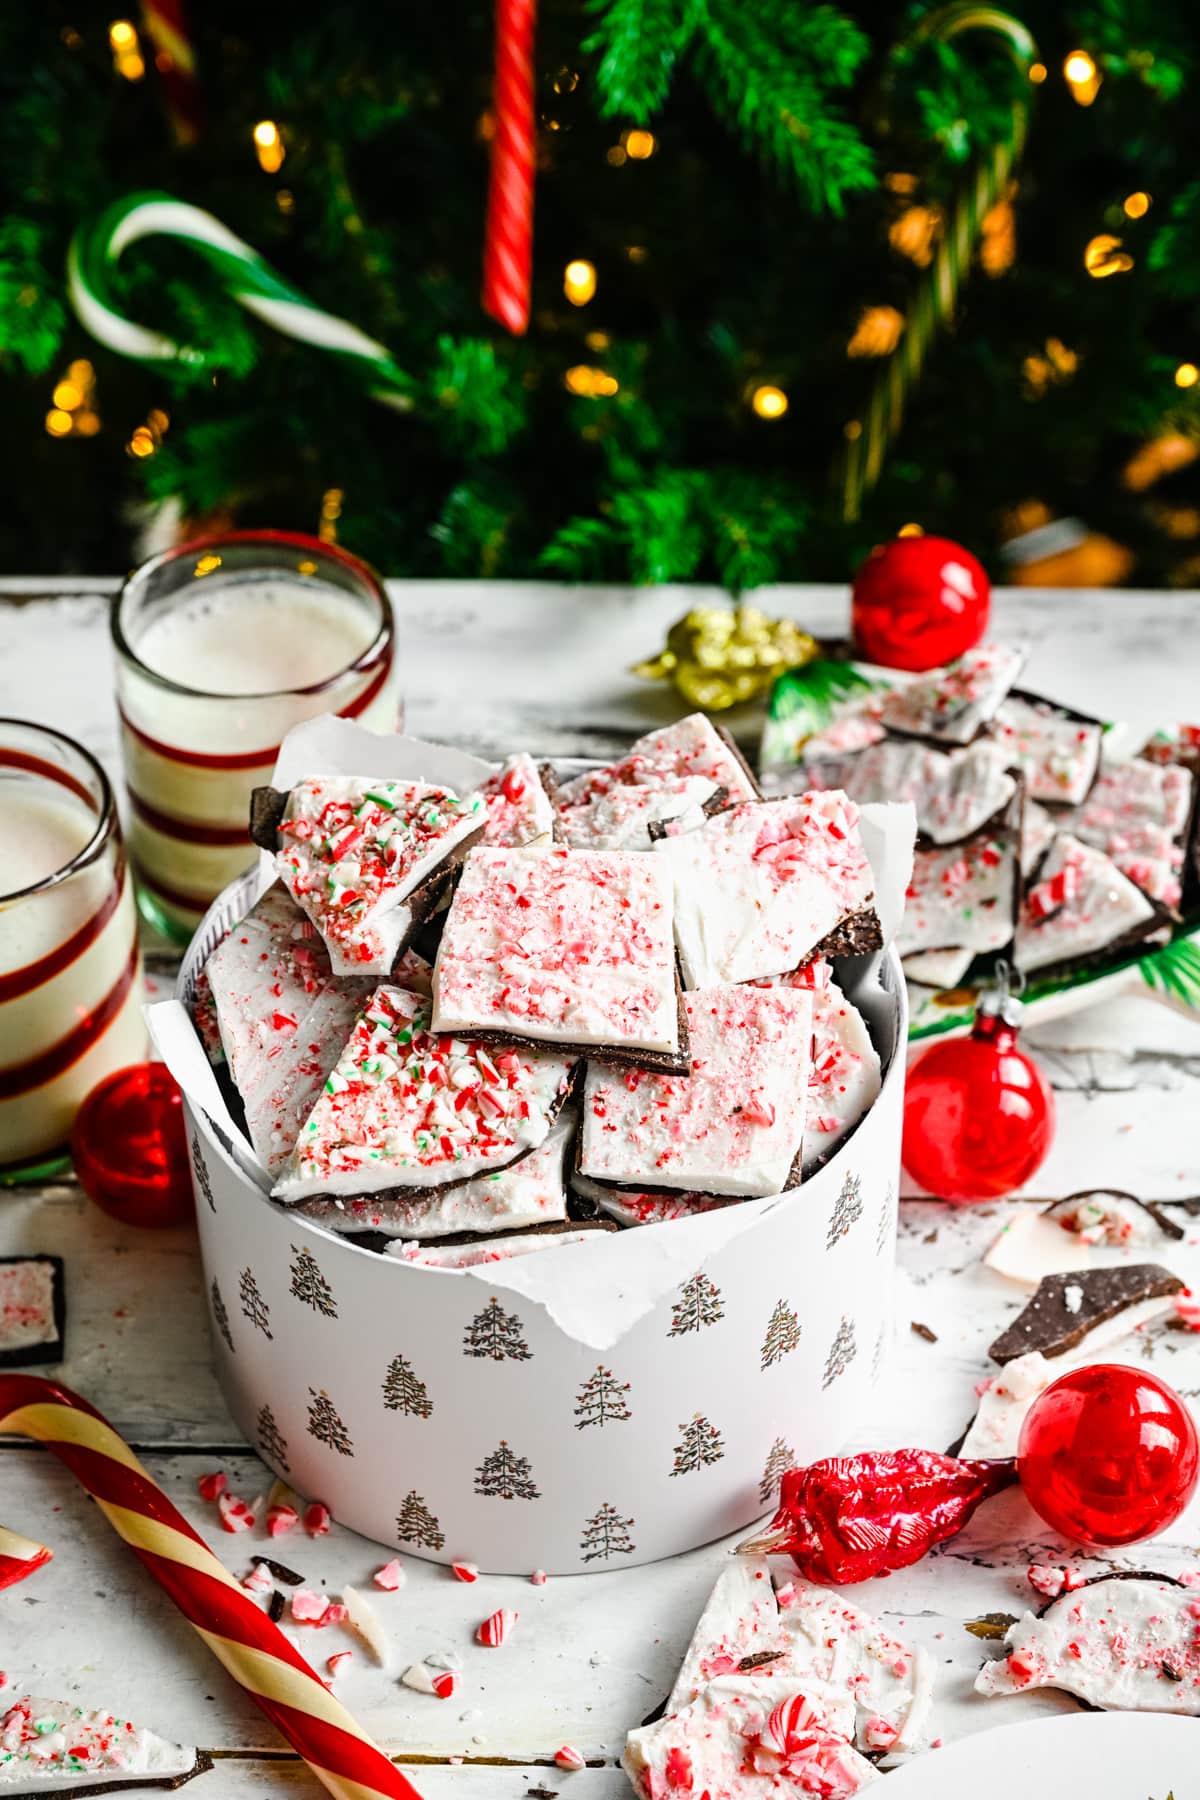 Finished peppermint bark in a gift basket by tree.